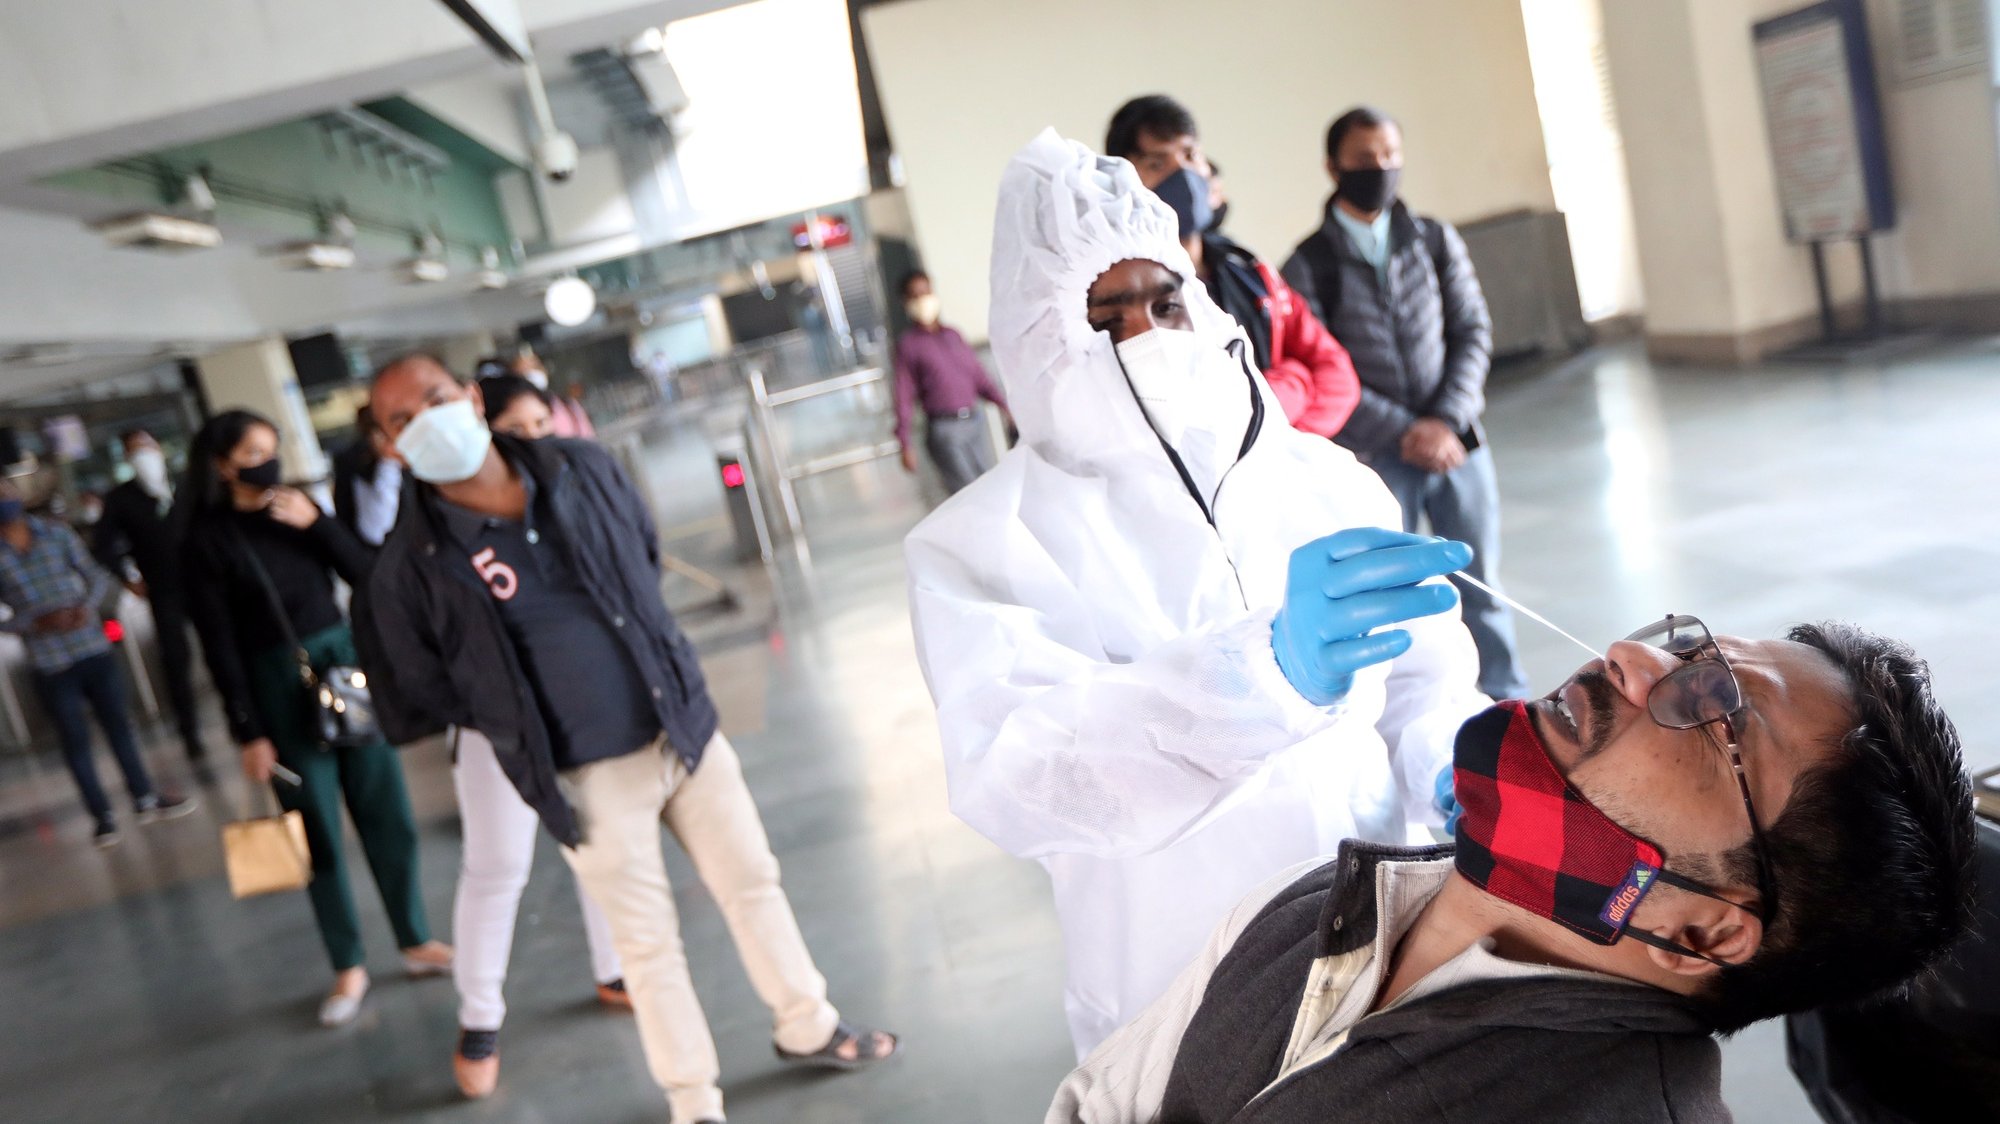 epa08838677 Indian medical personnel collect swab samples for a coronavirus COVID-19 Rapid Antigen detection tests from a person at a metro station near New Delhi, India, 24 November 2020. A special drive started for random COVID-19 testing at the Delhi borders, bust stands, Metro stations after Delhi recorded over 6,000 new COVID-19 cases over the last 24 hours. The Delhi government is calling this latest surge the third wave of coronavirus as India continues to be the second worst-hit country by the spread of the COVID-19 disease, only behind the United States.  EPA/HARISH TYAGI